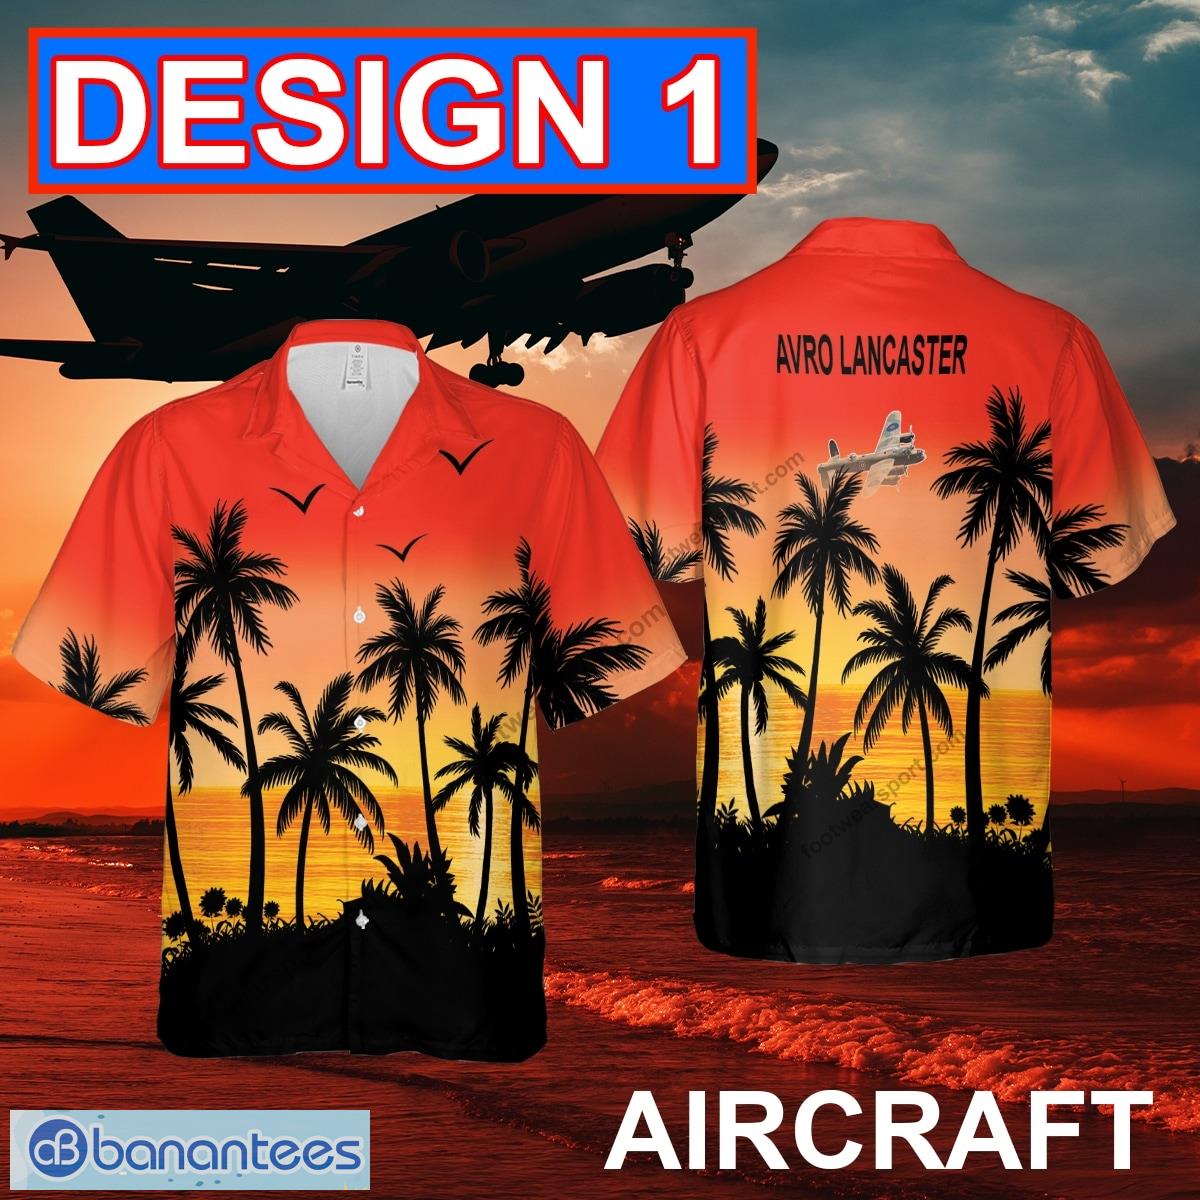 Avro Lancaster Aircraft Hawaiian Shirt Red Color All Over Print For Men And Women - Avro Lancaster Aircraft Hawaiian Shirt Multi Design 1